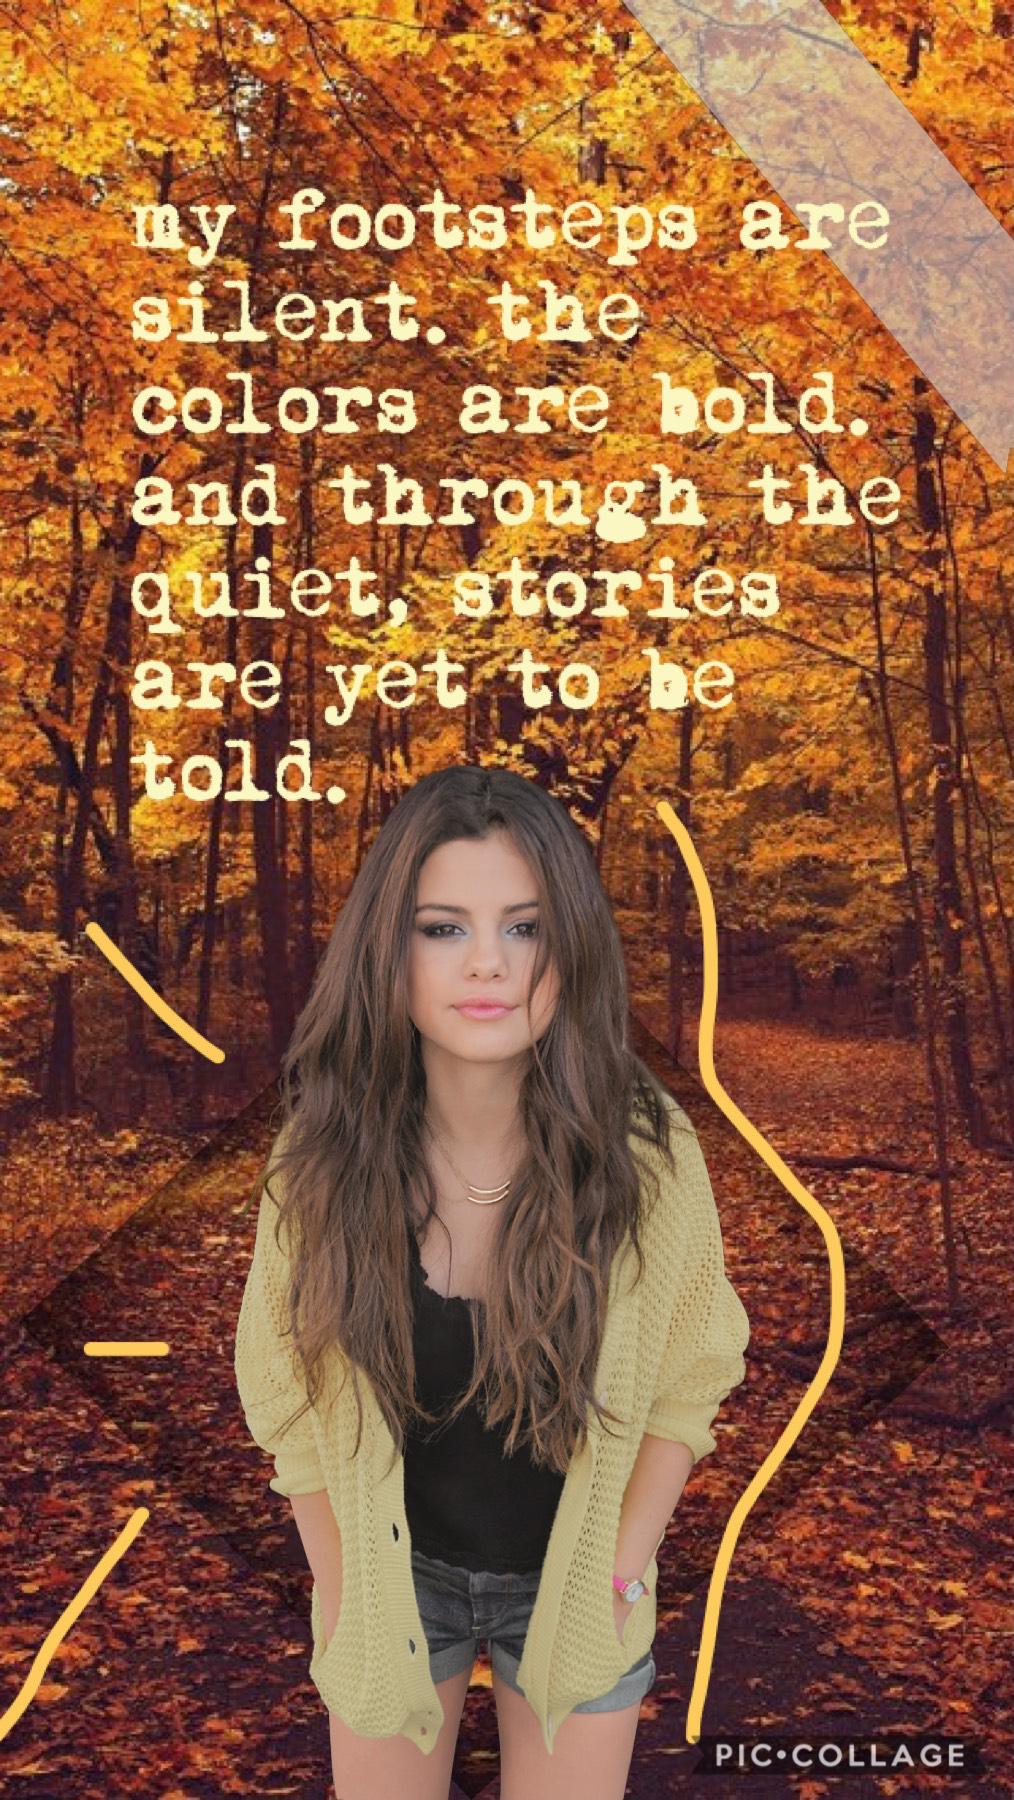 Tap! Here’s another from me, since it’s been so long. This and my last collage are original quotes🤗 feel free to use, but please give me credit. Please like my recents💛